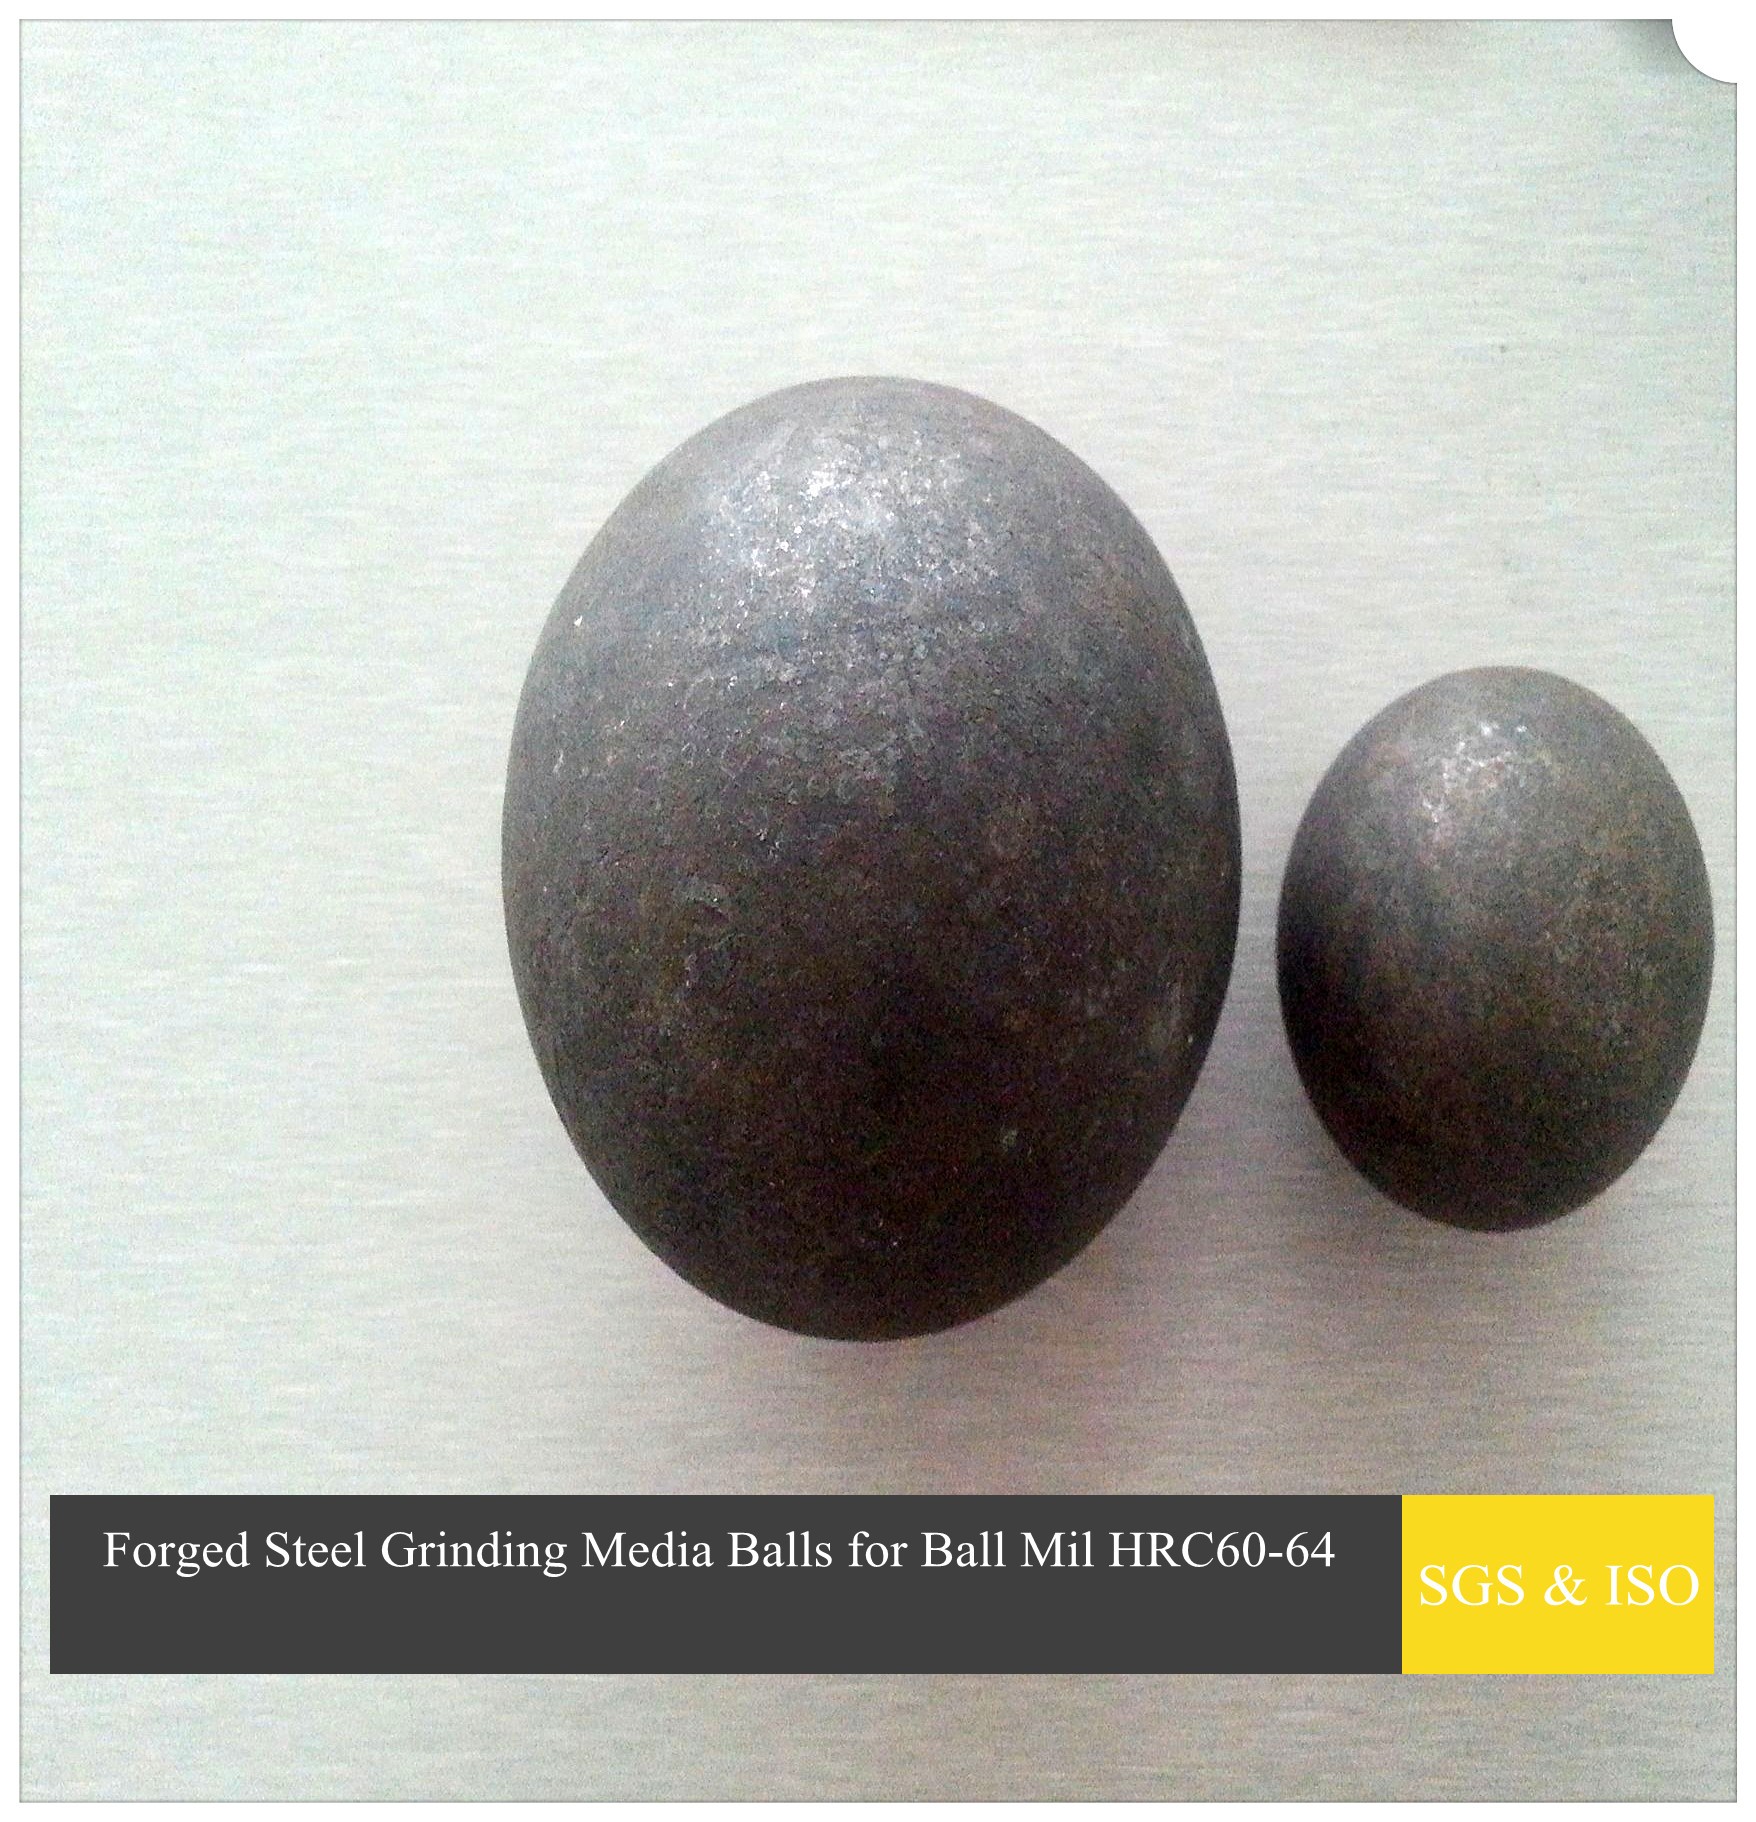 China Supply Grinding Media Balls For Mining,Grinding balls Promotions